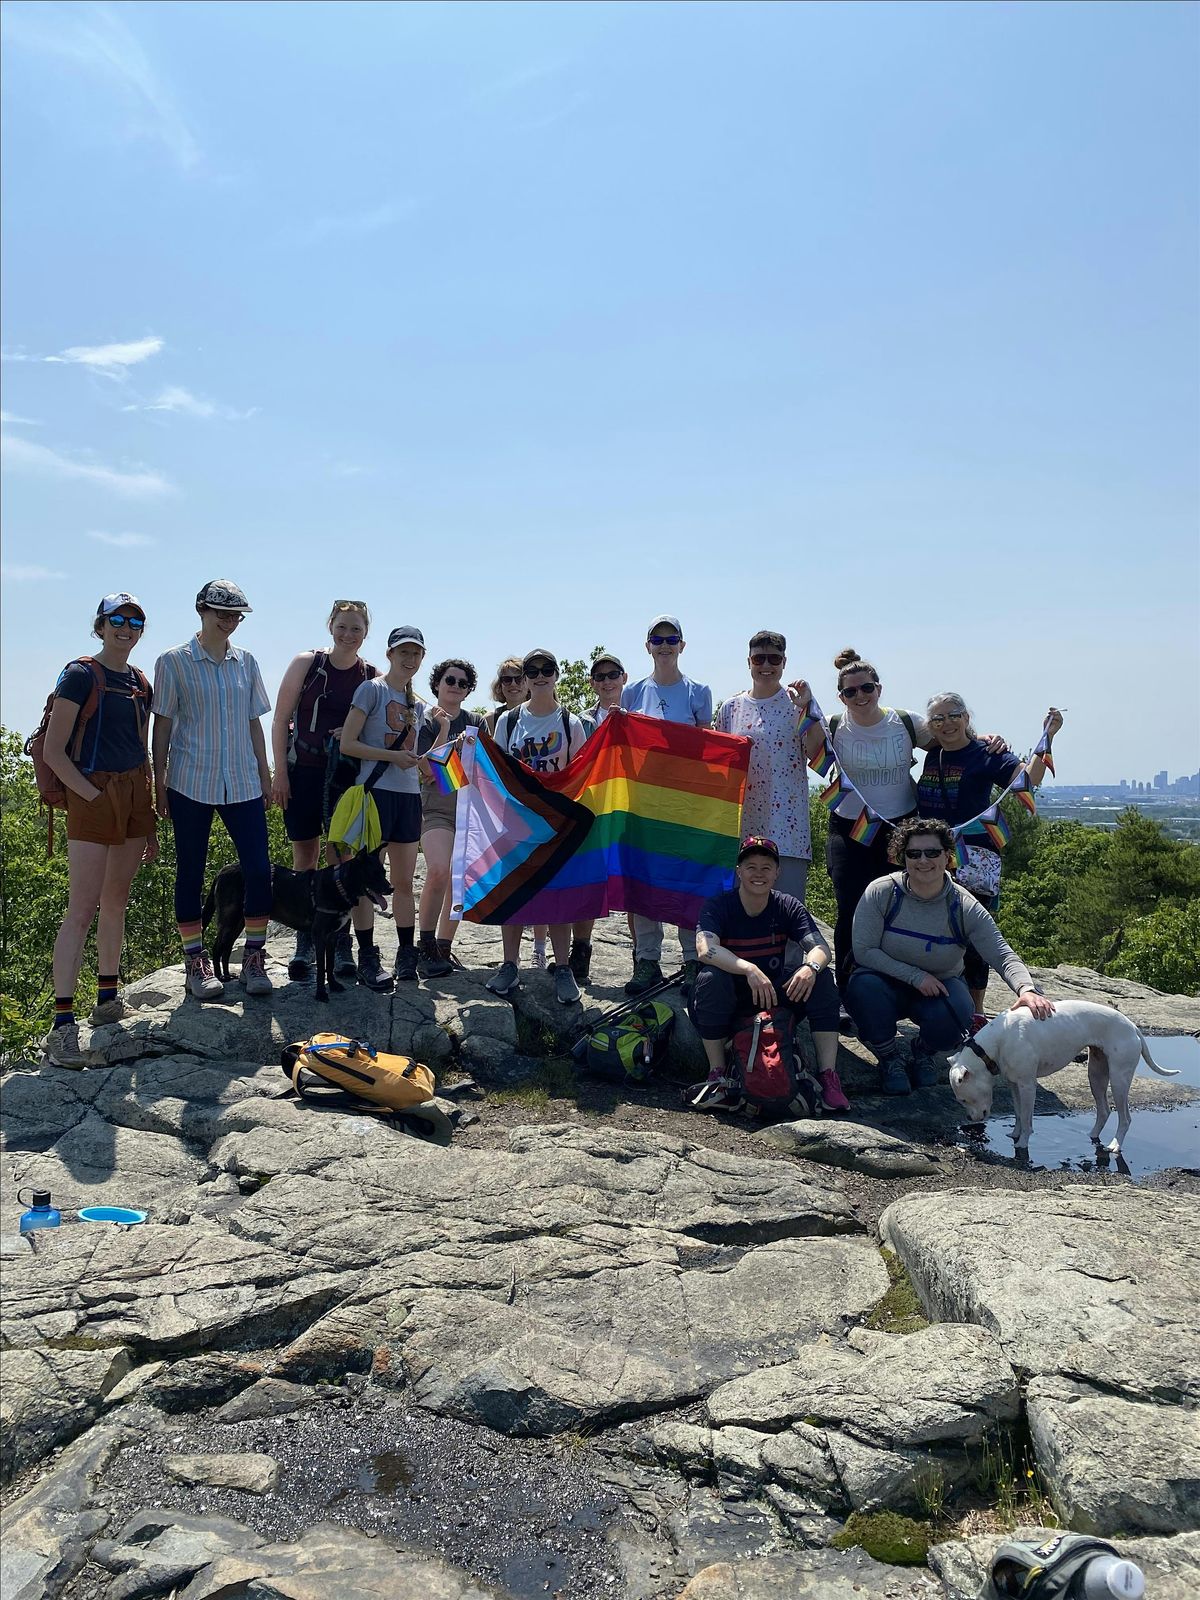 Queer and Trans Hiking Fell-ows